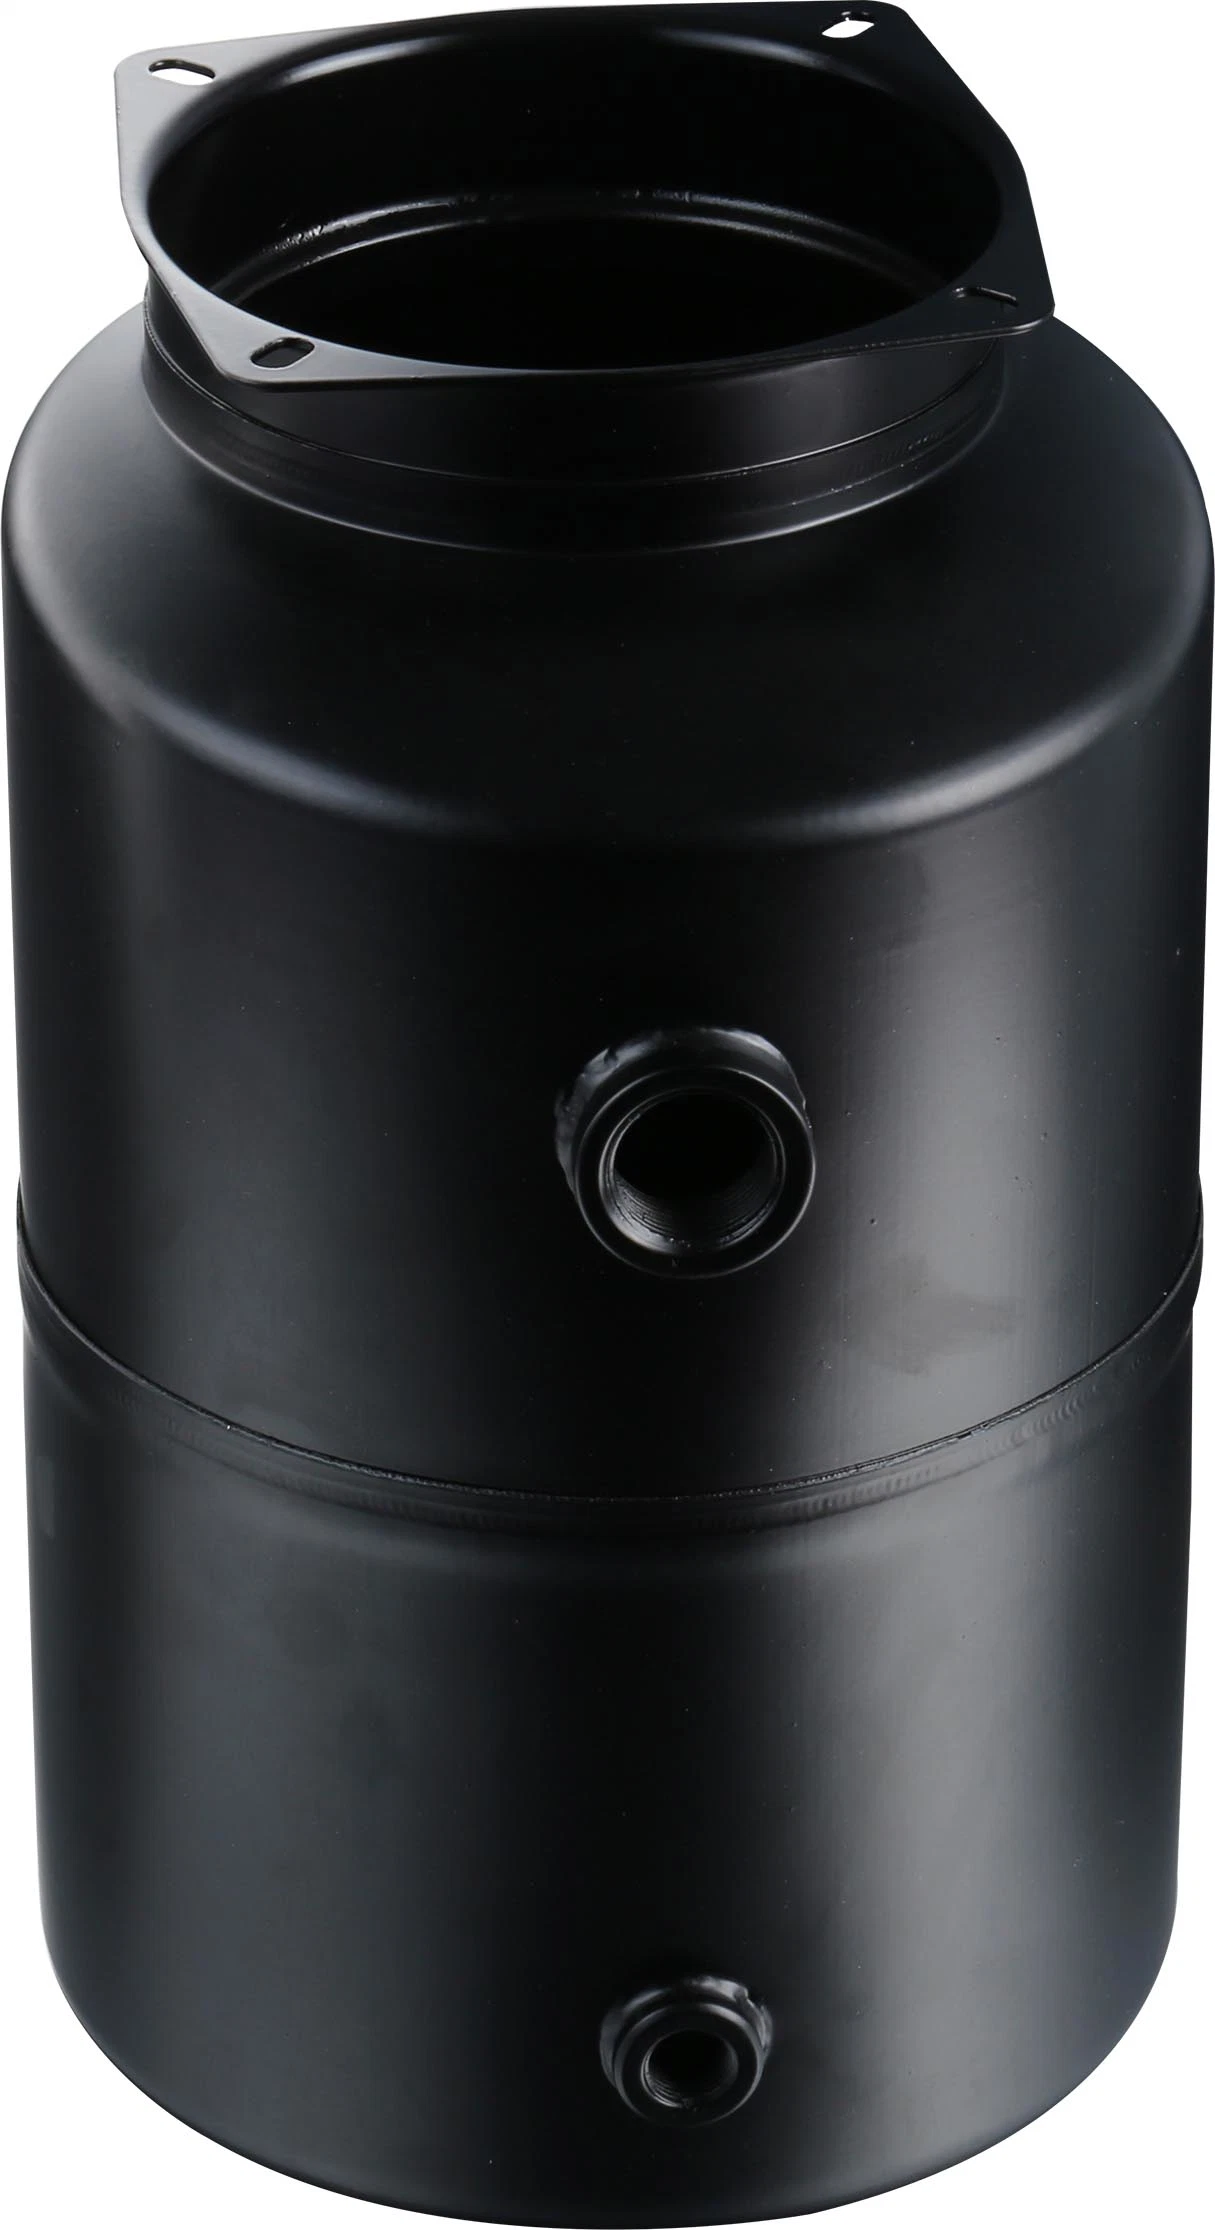 Hydraulic Round Steel Oil Tank with E-Coating for Mini Power Pack /Power Unit Reservoirs Fuel Tank